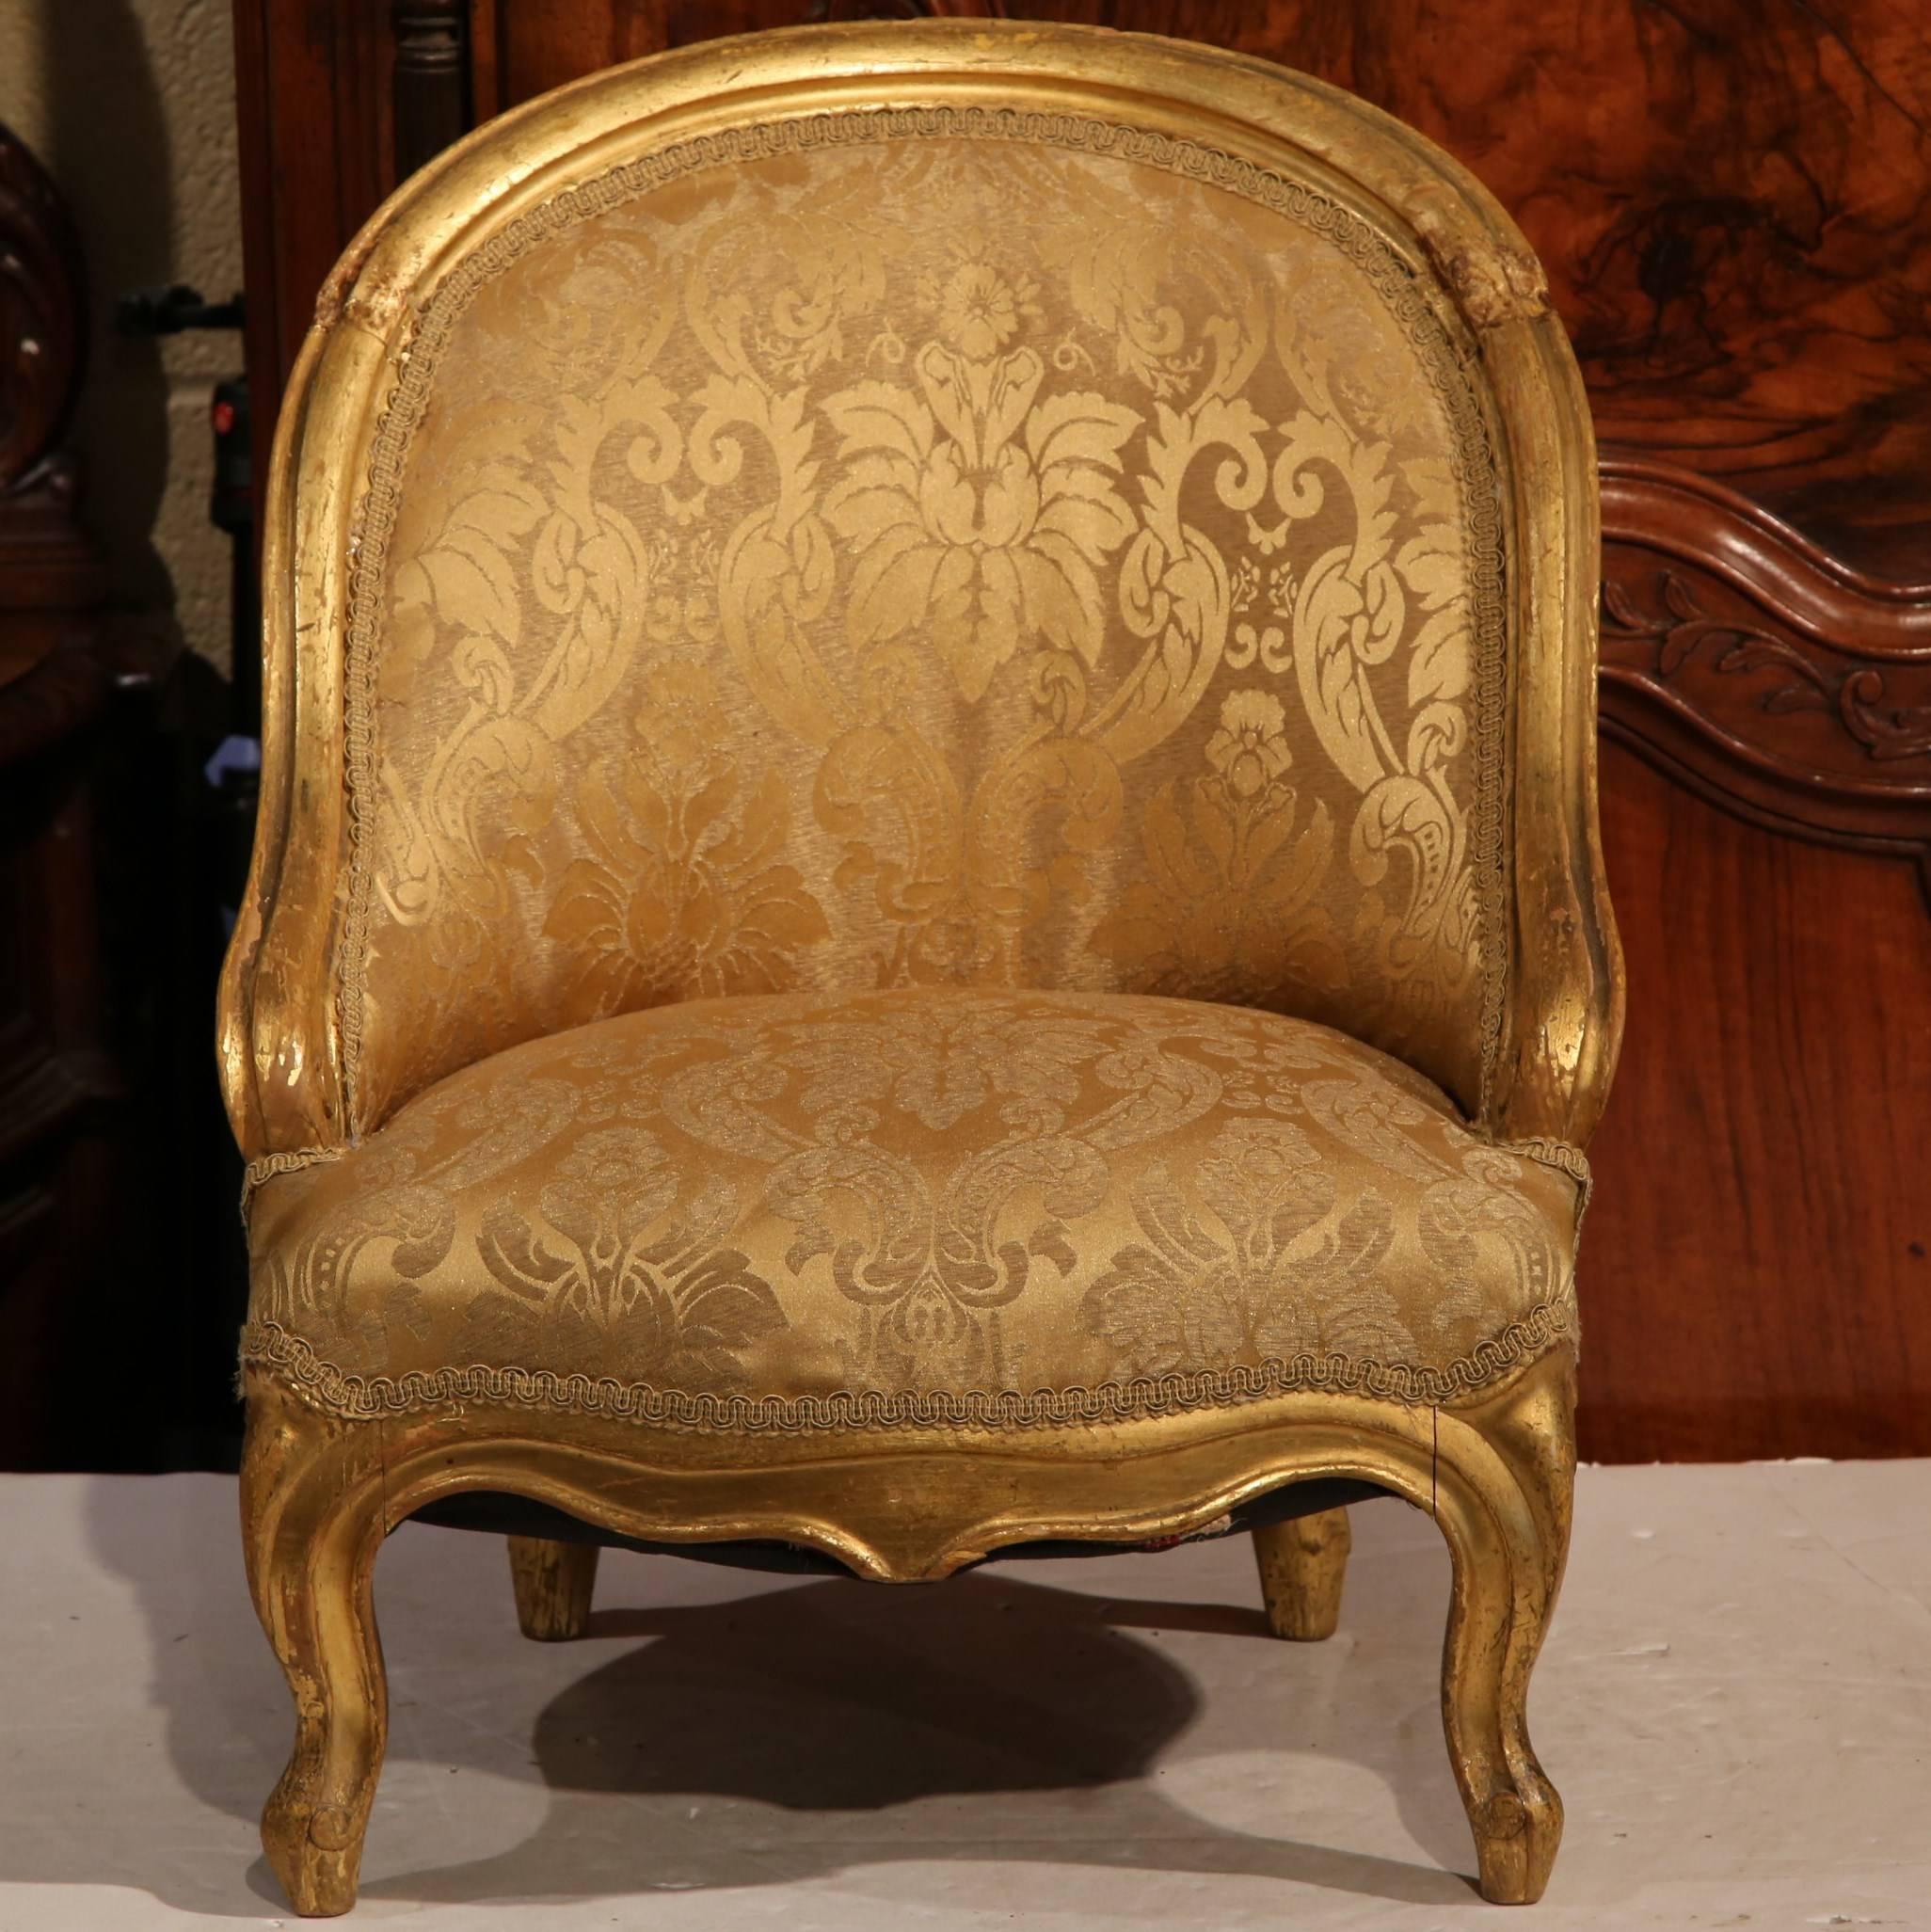 This elegant, antique children's armchair was crafted in France, circa 1850. The rounded, high back chair has a frame embellished with its original gold leaf finish. The Louis Philippe chair has been reupholstered with a Fortuny-like fabric that has